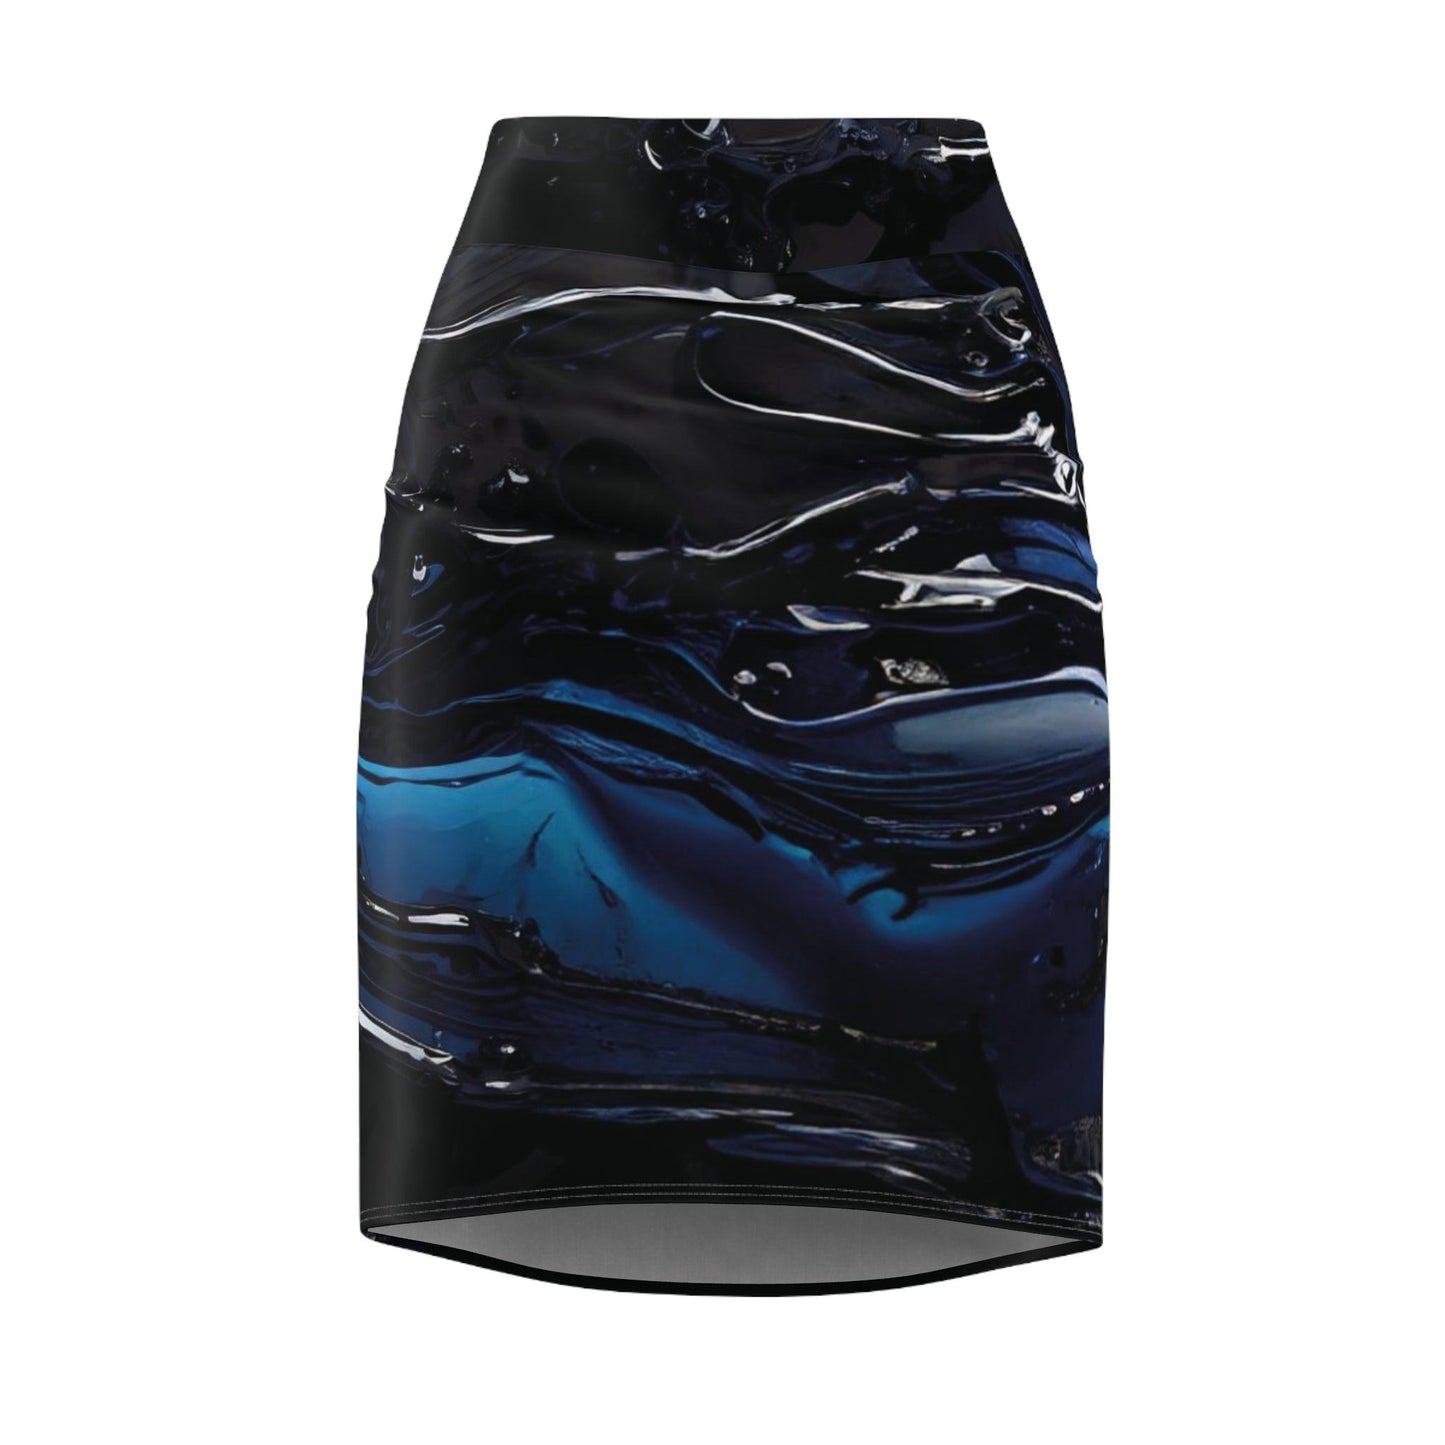 Black Blue Liquid Bleistiftrock Bleistiftrock 74.99 All Over Print, AOP, AOP Clothing, Assembled in the USA, Assembled in USA, Black, Bleistiftrock, Blue, Made in the USA, Made in USA, Skirts & Dresses, Sublimation, Women's Clothing JLR Design